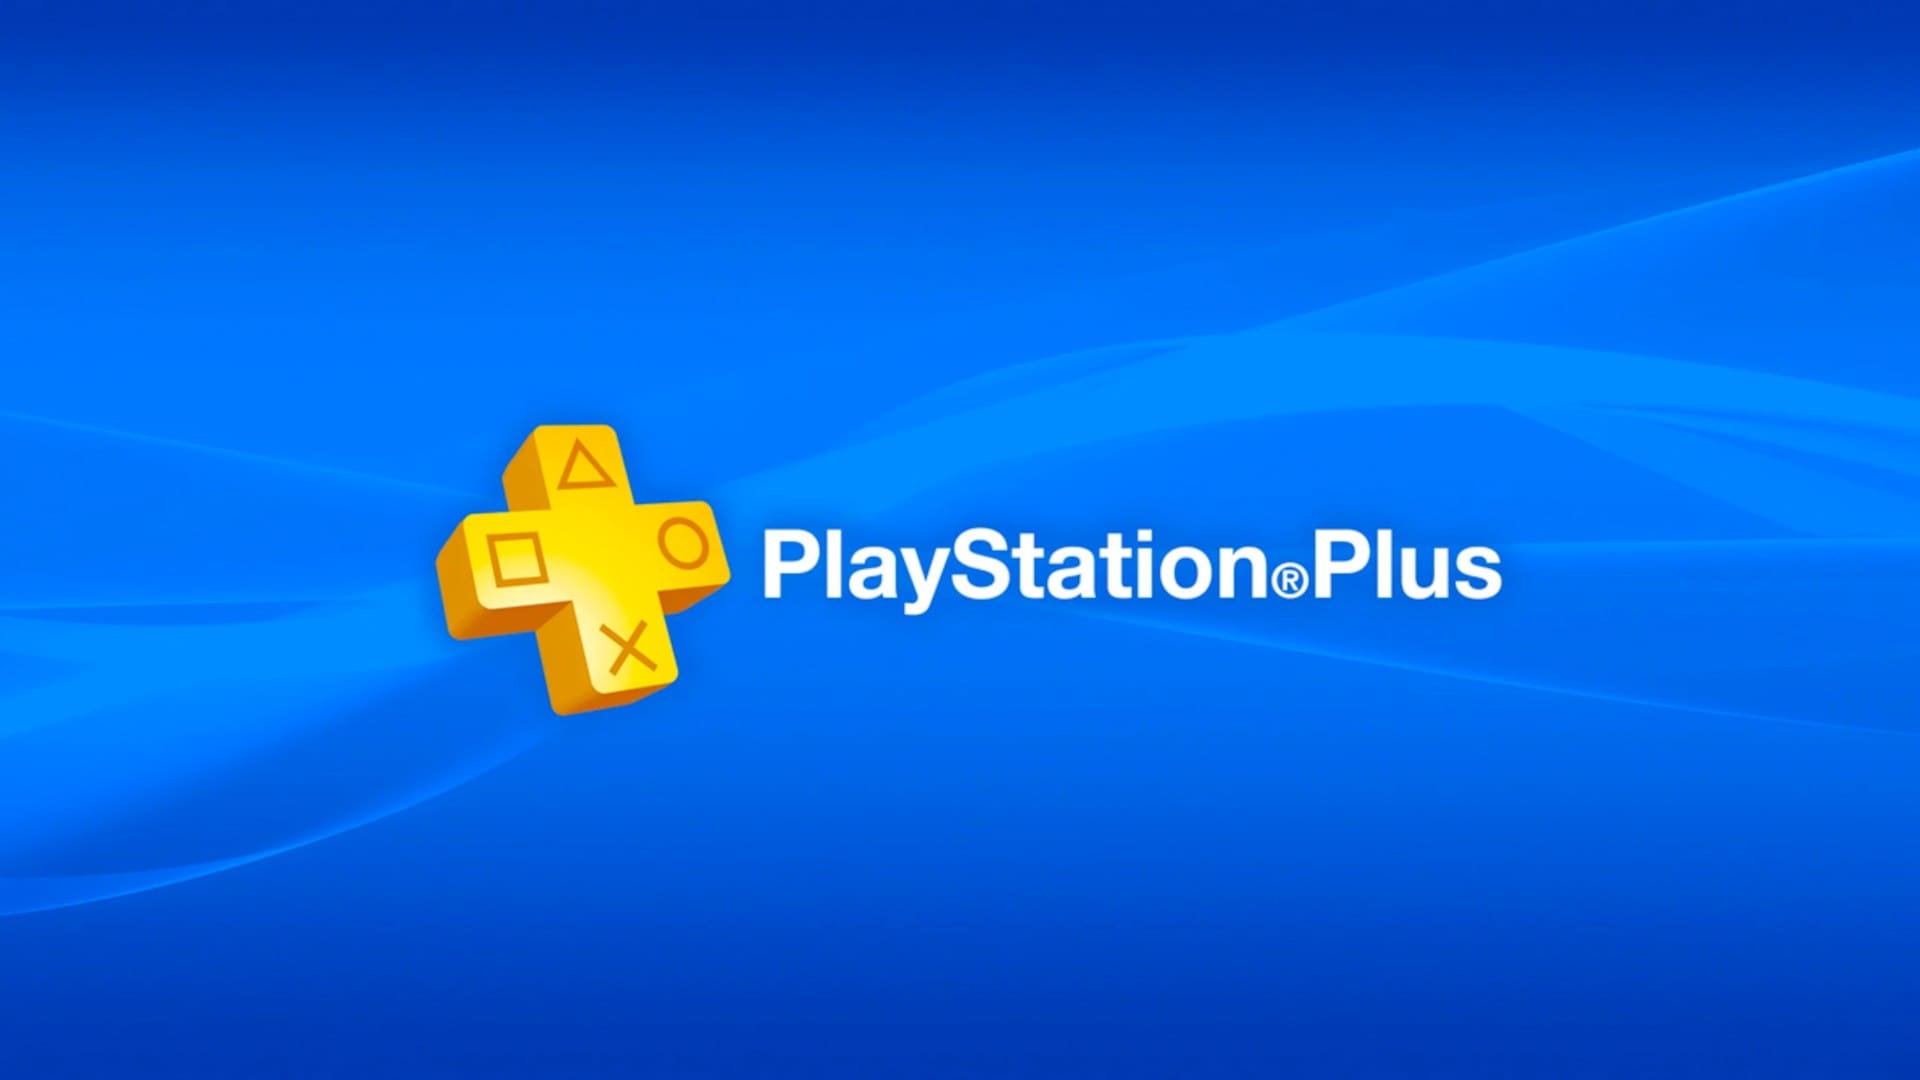 PlayStation Plus retail cards